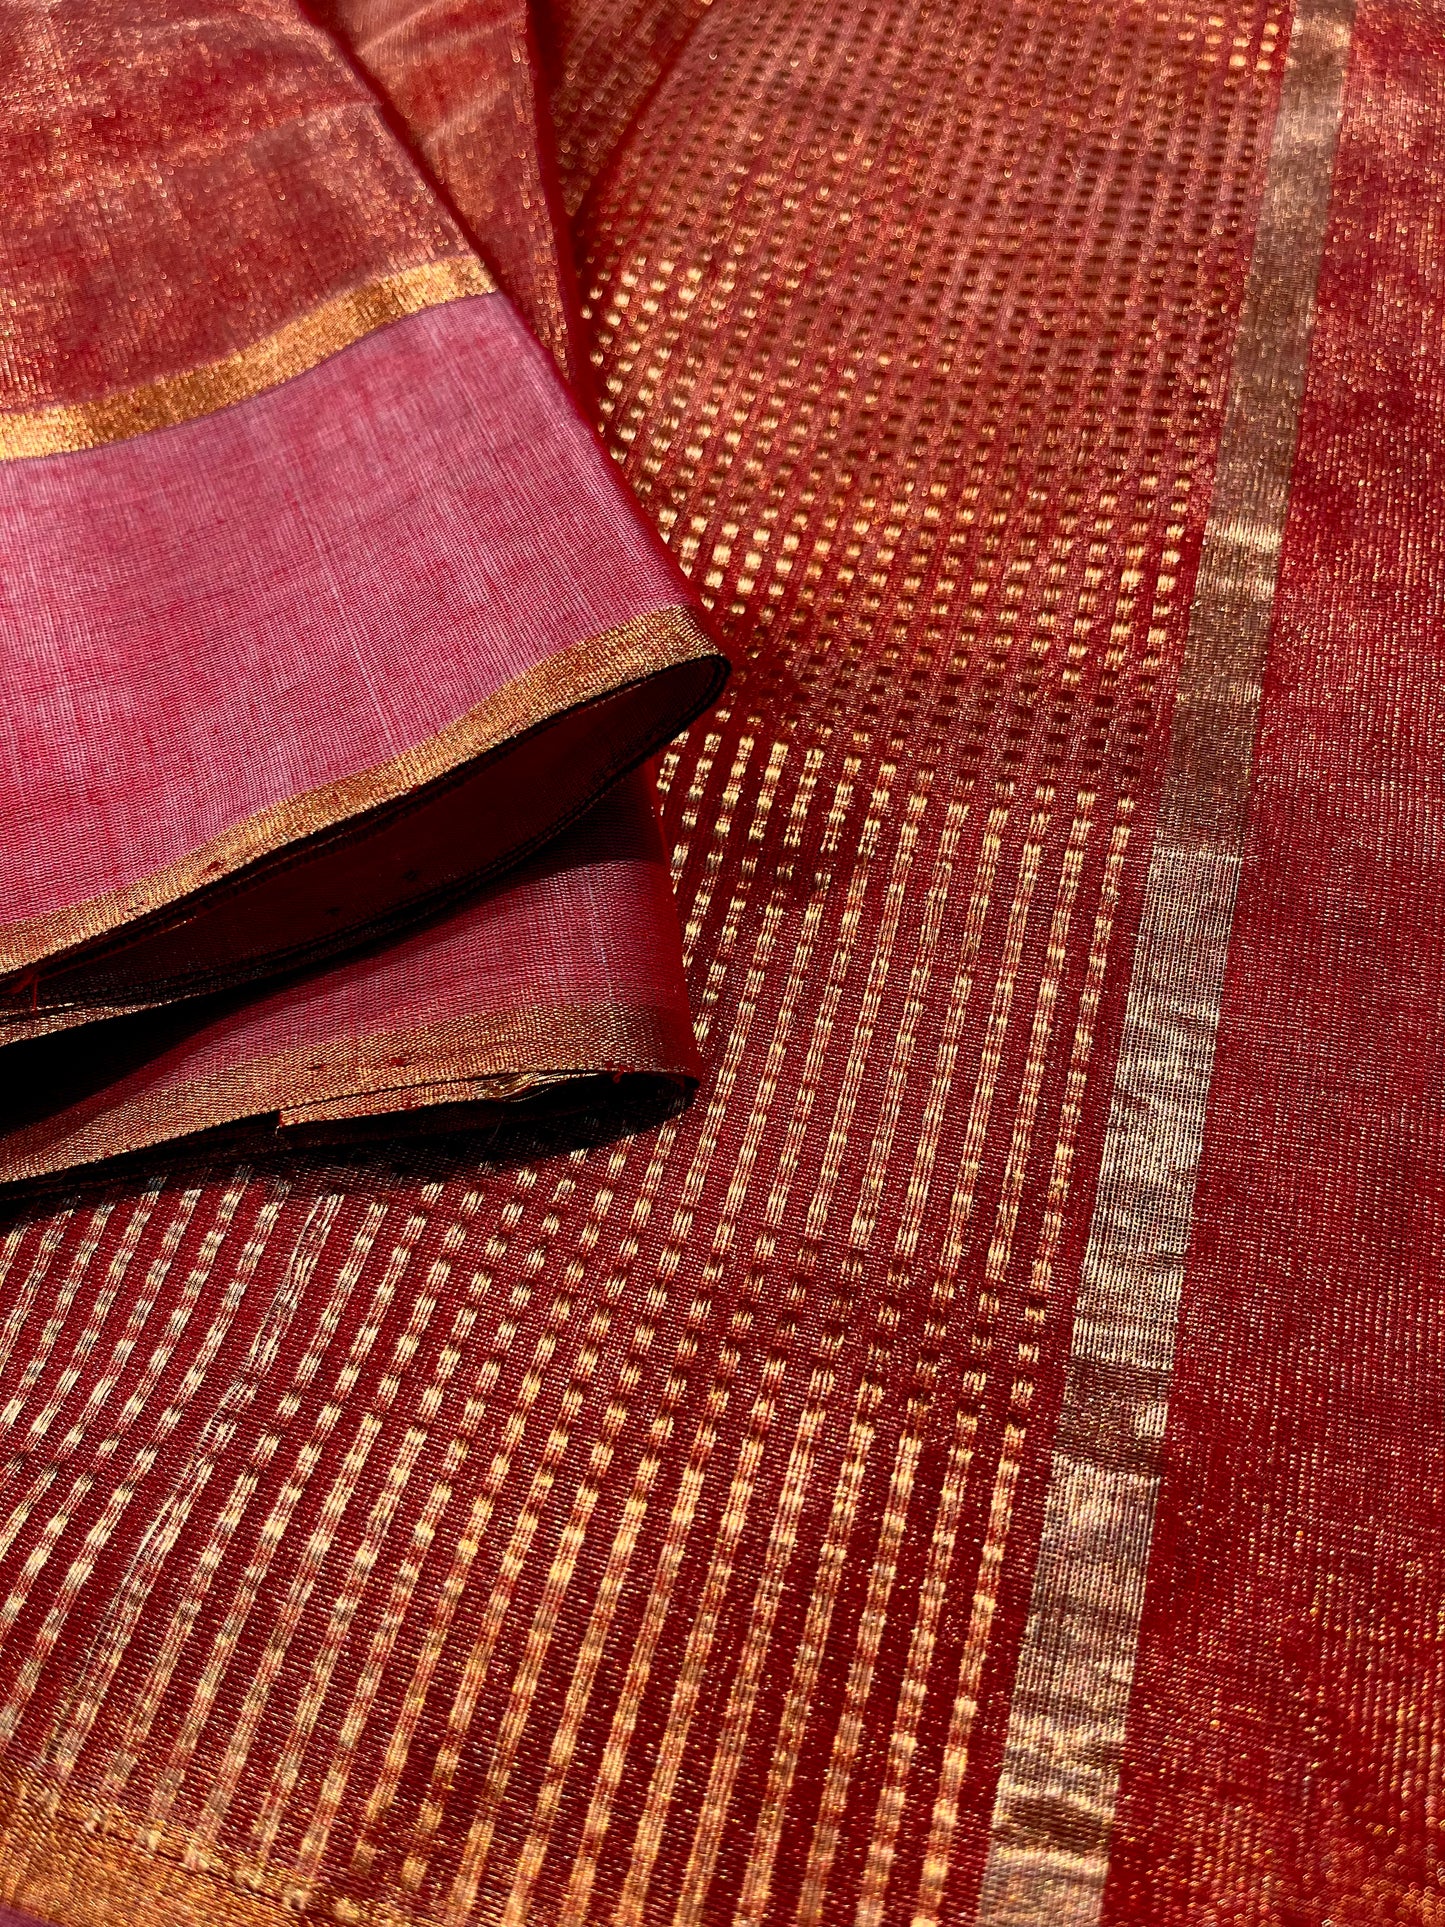 RUST RED COLOUR CHANDERI TISSUE SAREE WITH KIRKITA PALLA EMBELLISHED WITH ZARI WEAVES